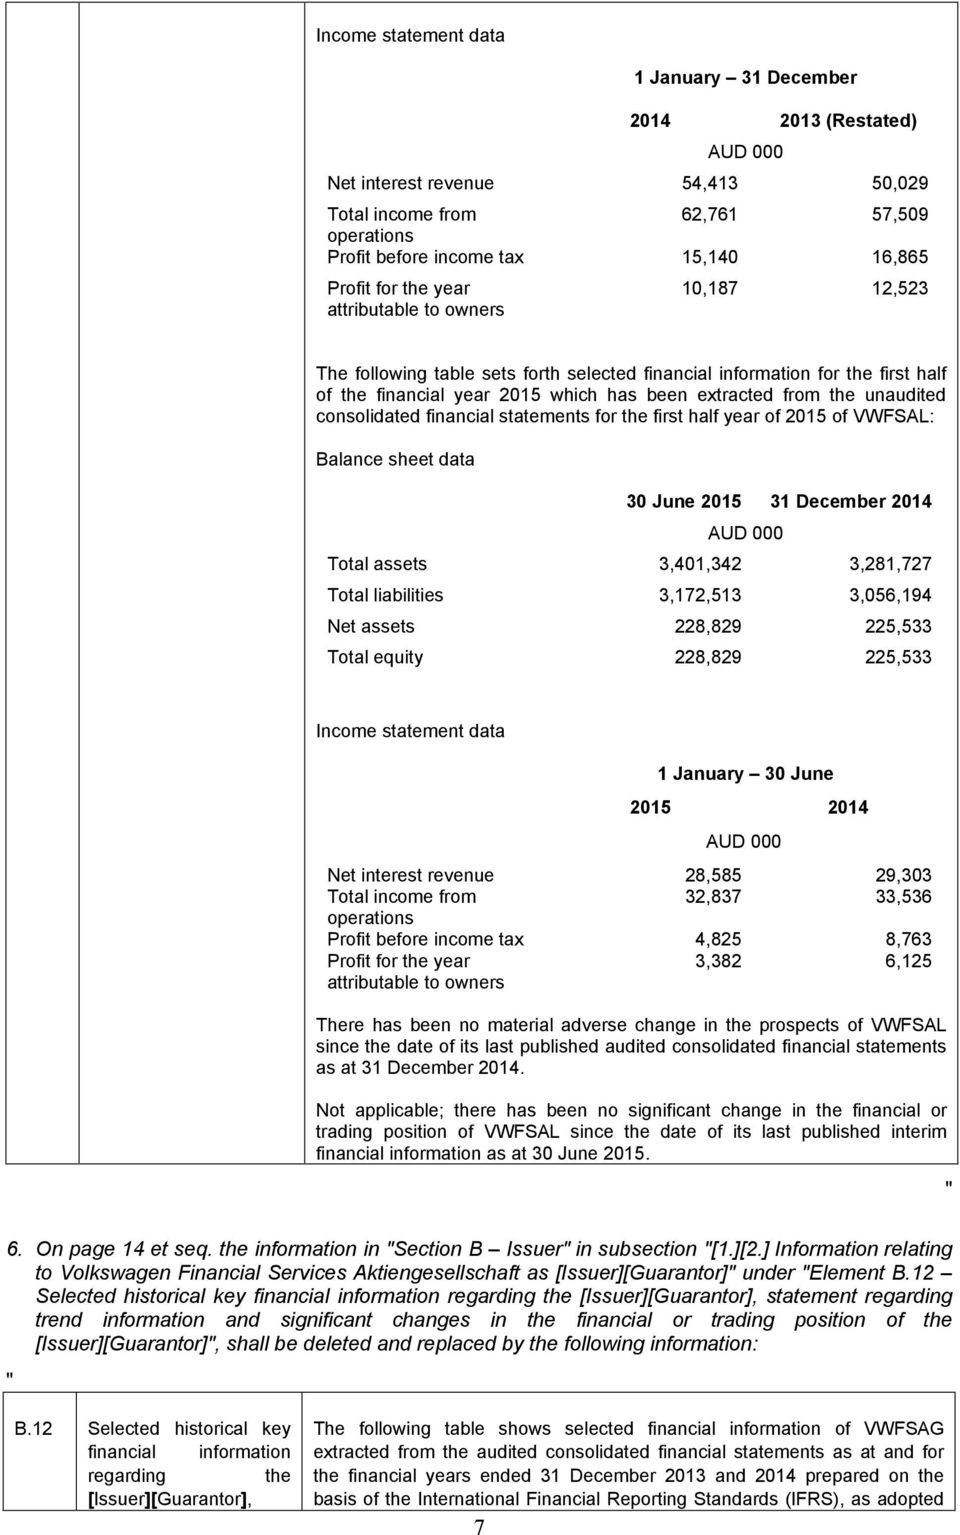 unaudited consolidated financial statements for the first half year of 2015 of VWFSAL: Balance sheet data 30 June 2015 31 December 2014 AUD 000 Total assets 3,401,342 3,281,727 Total liabilities